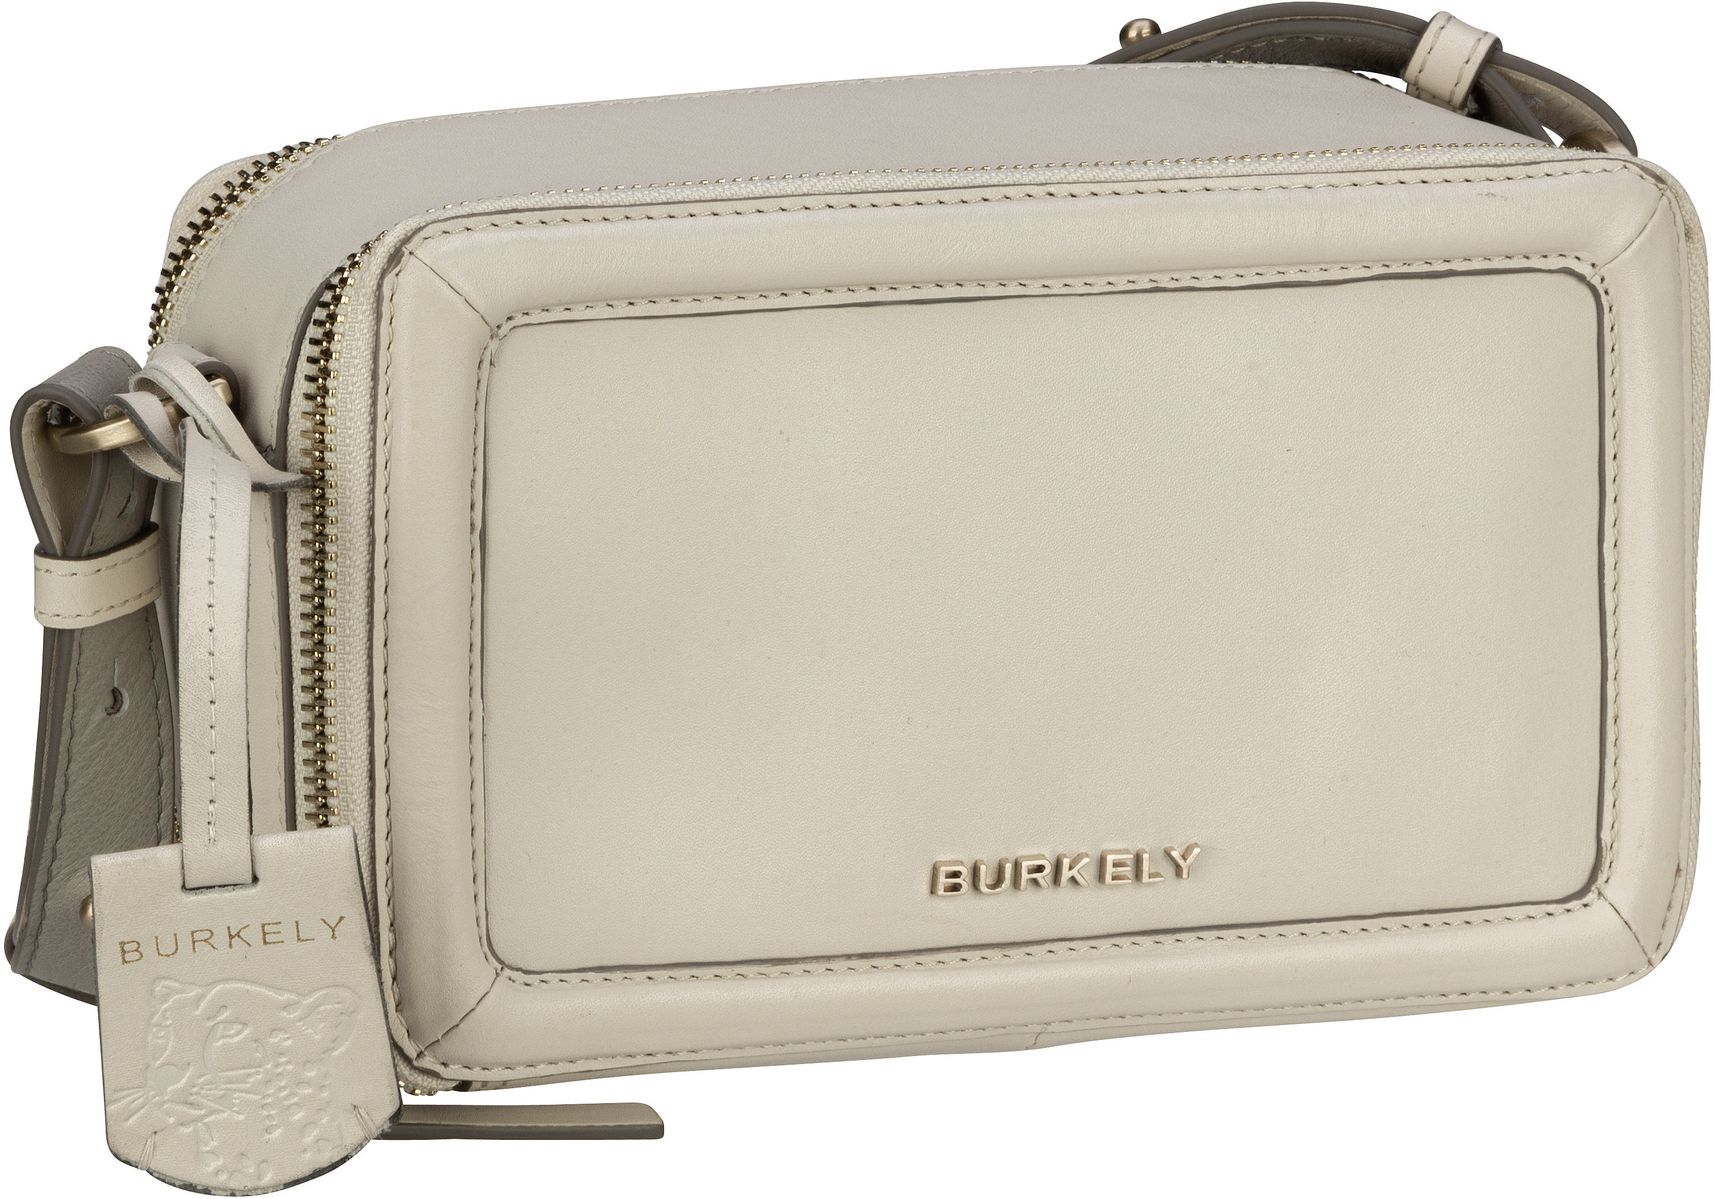 Burkely Beloved Bailey Box Bag - Off White